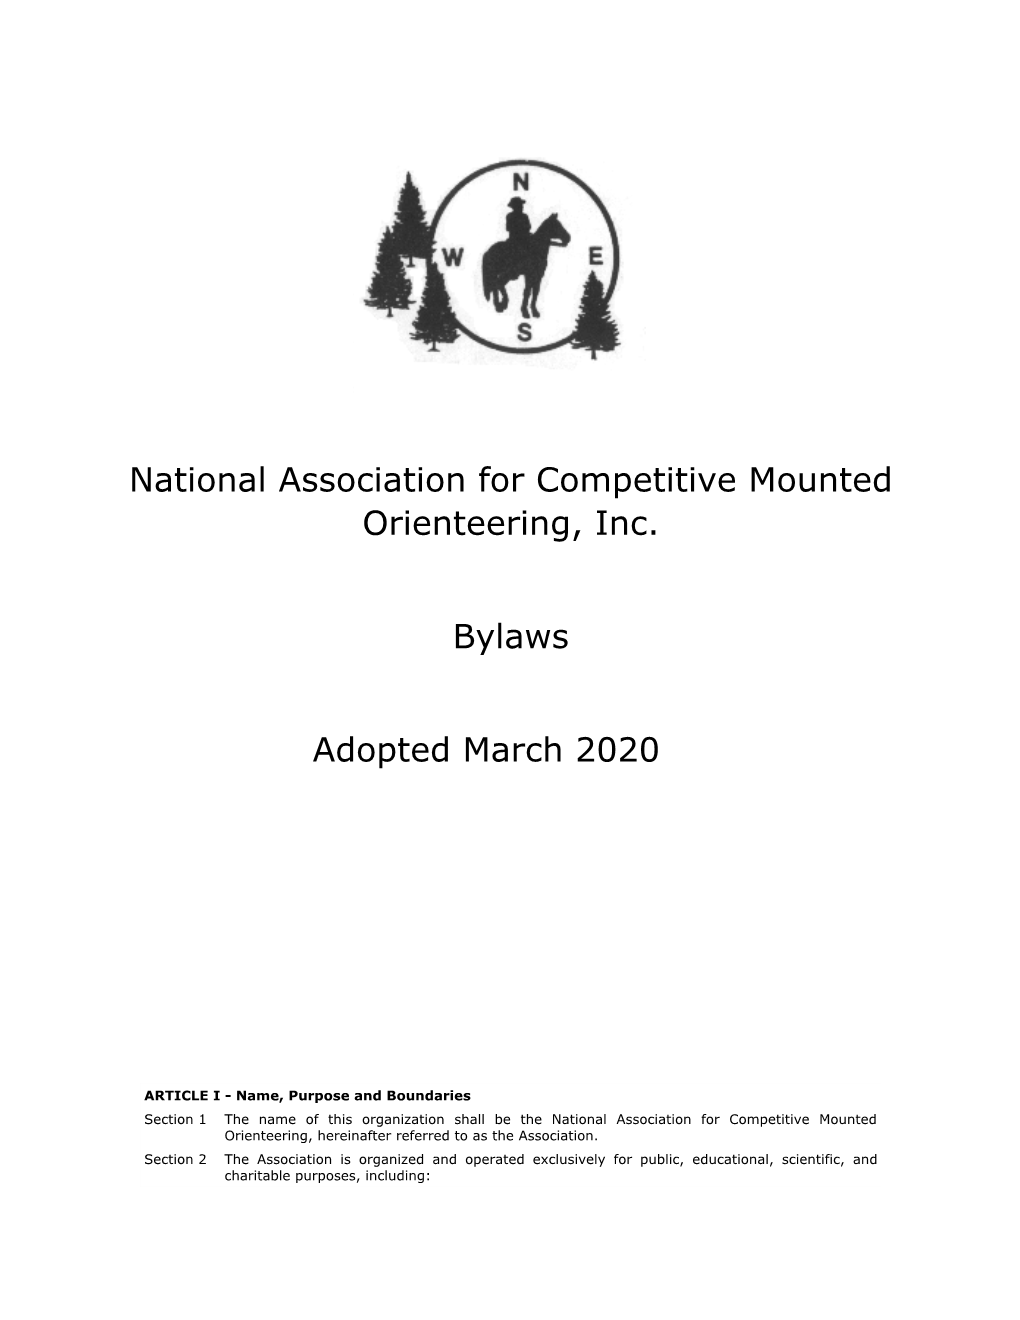 National Association for Competitive Mounted Orienteering, Inc. Bylaws